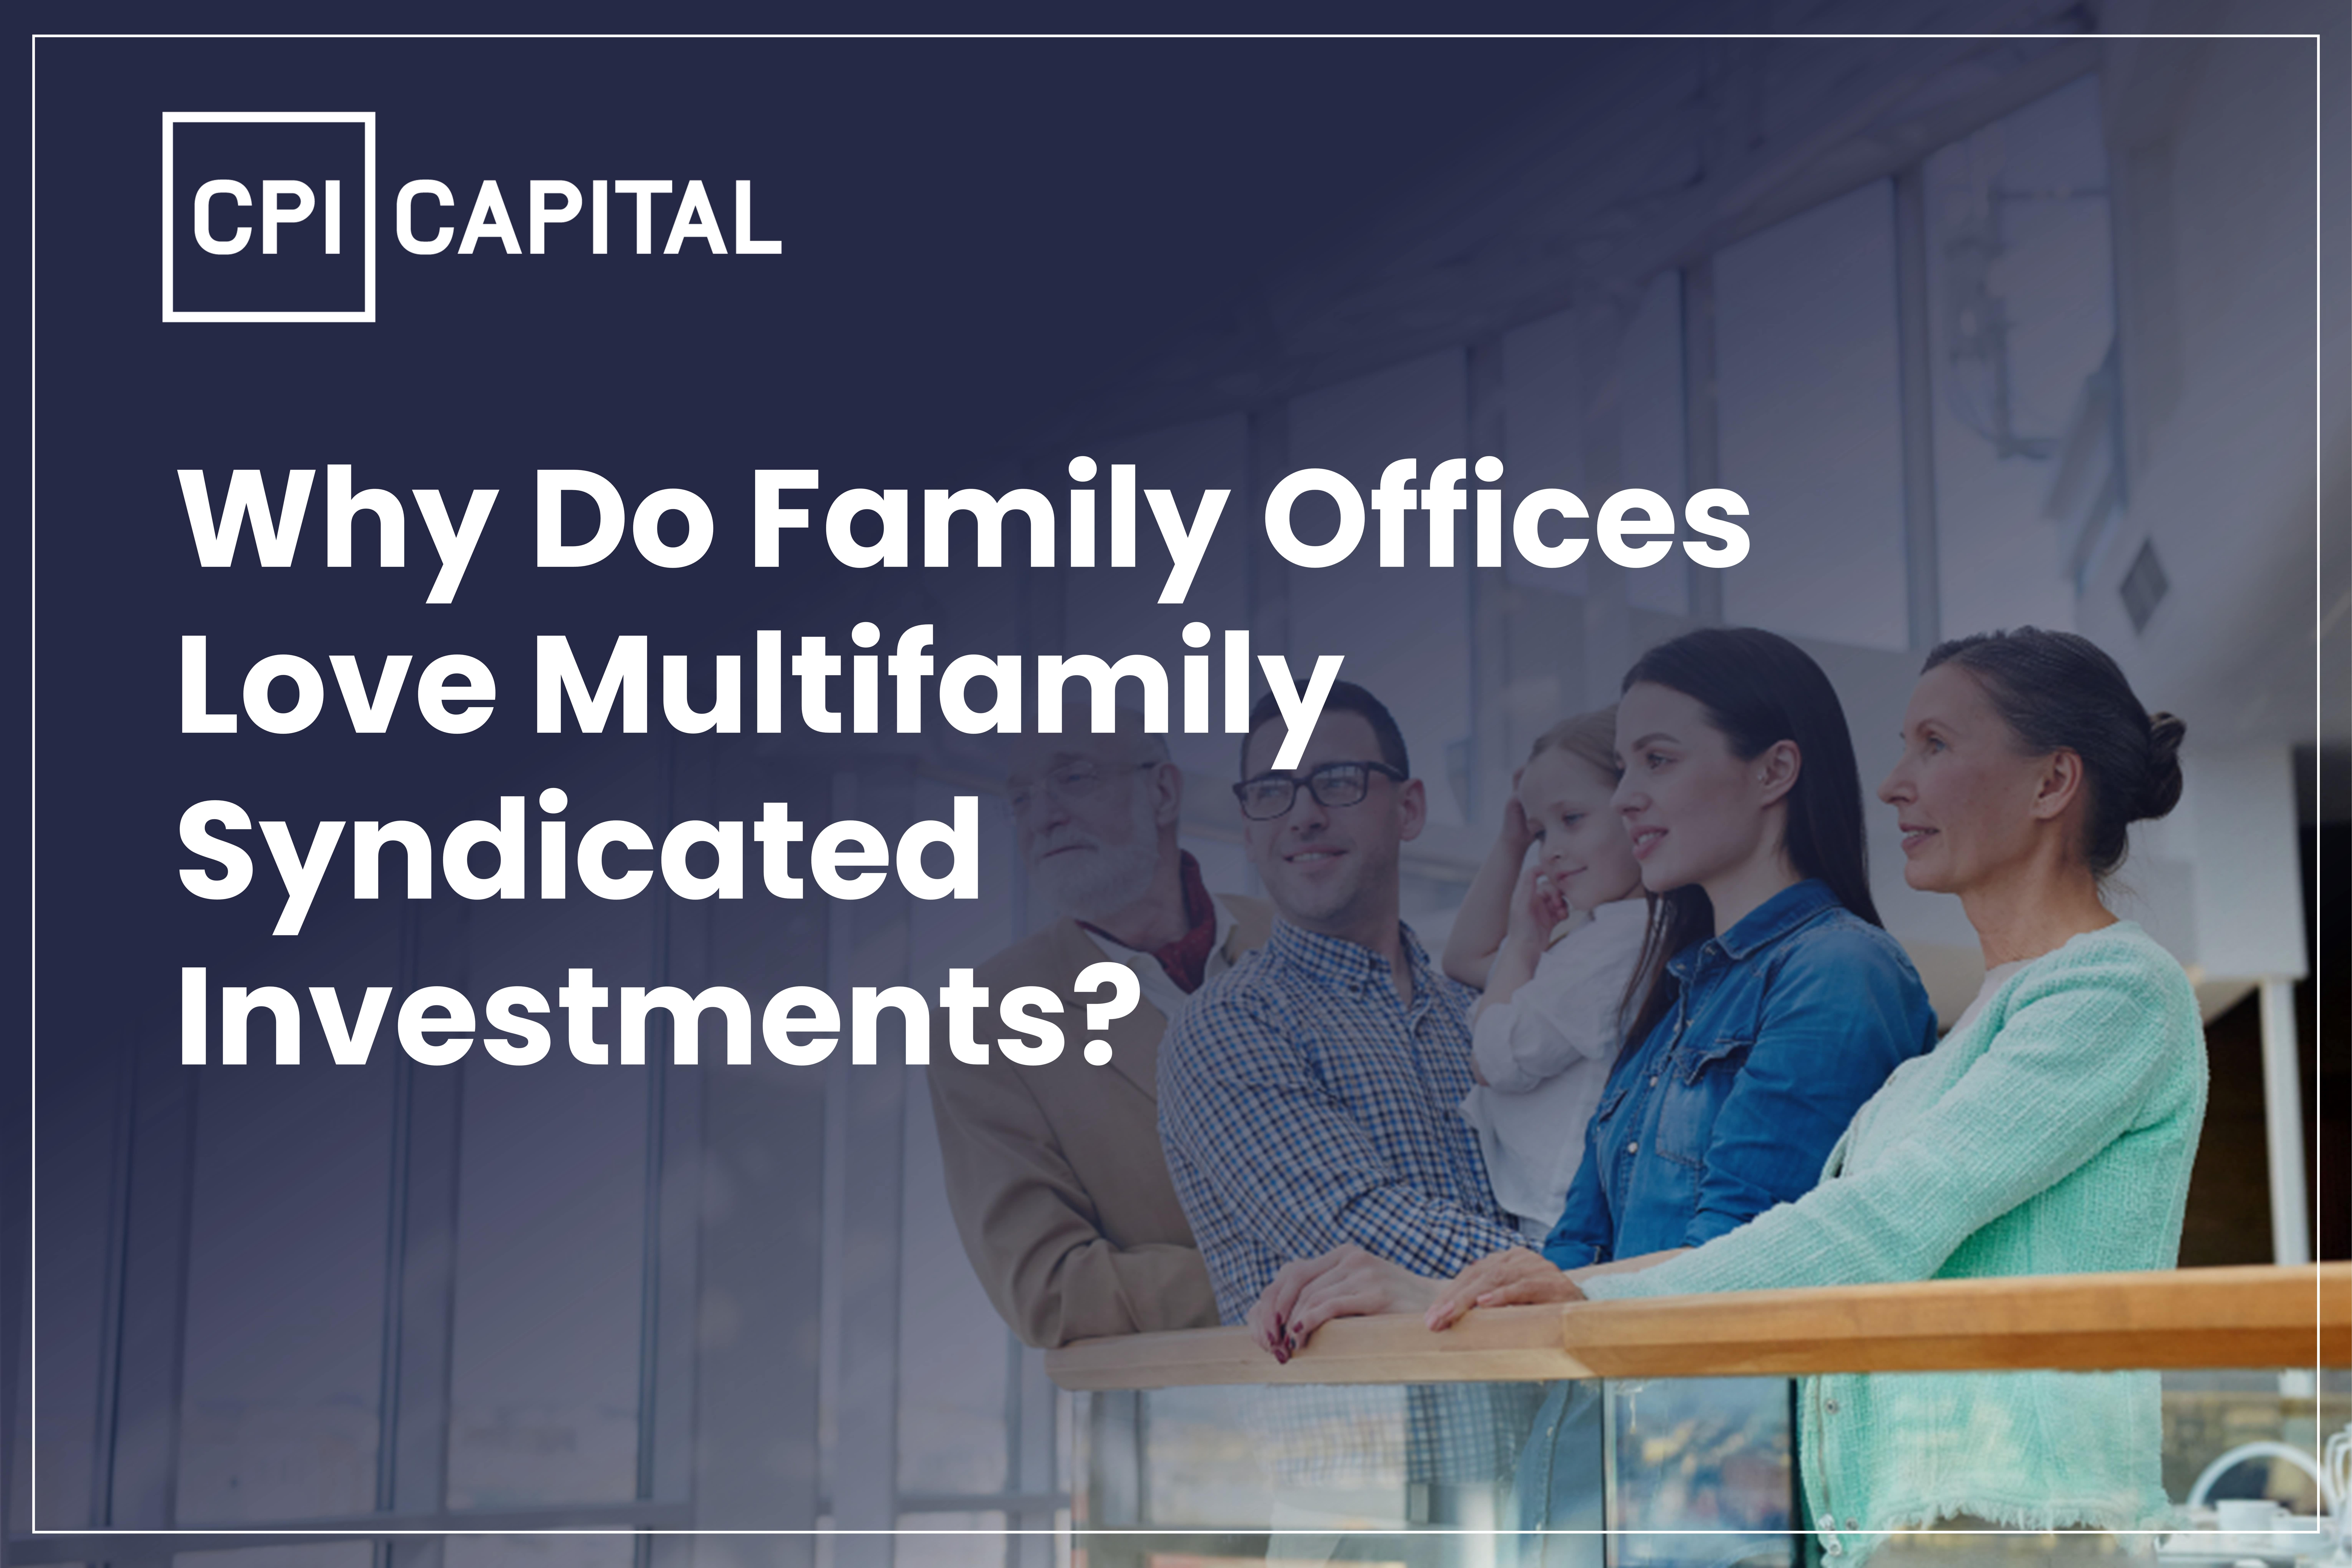 CPI-capital_Why-Do-Family-Offices-Love-Multifamily-Syndicated-Investments